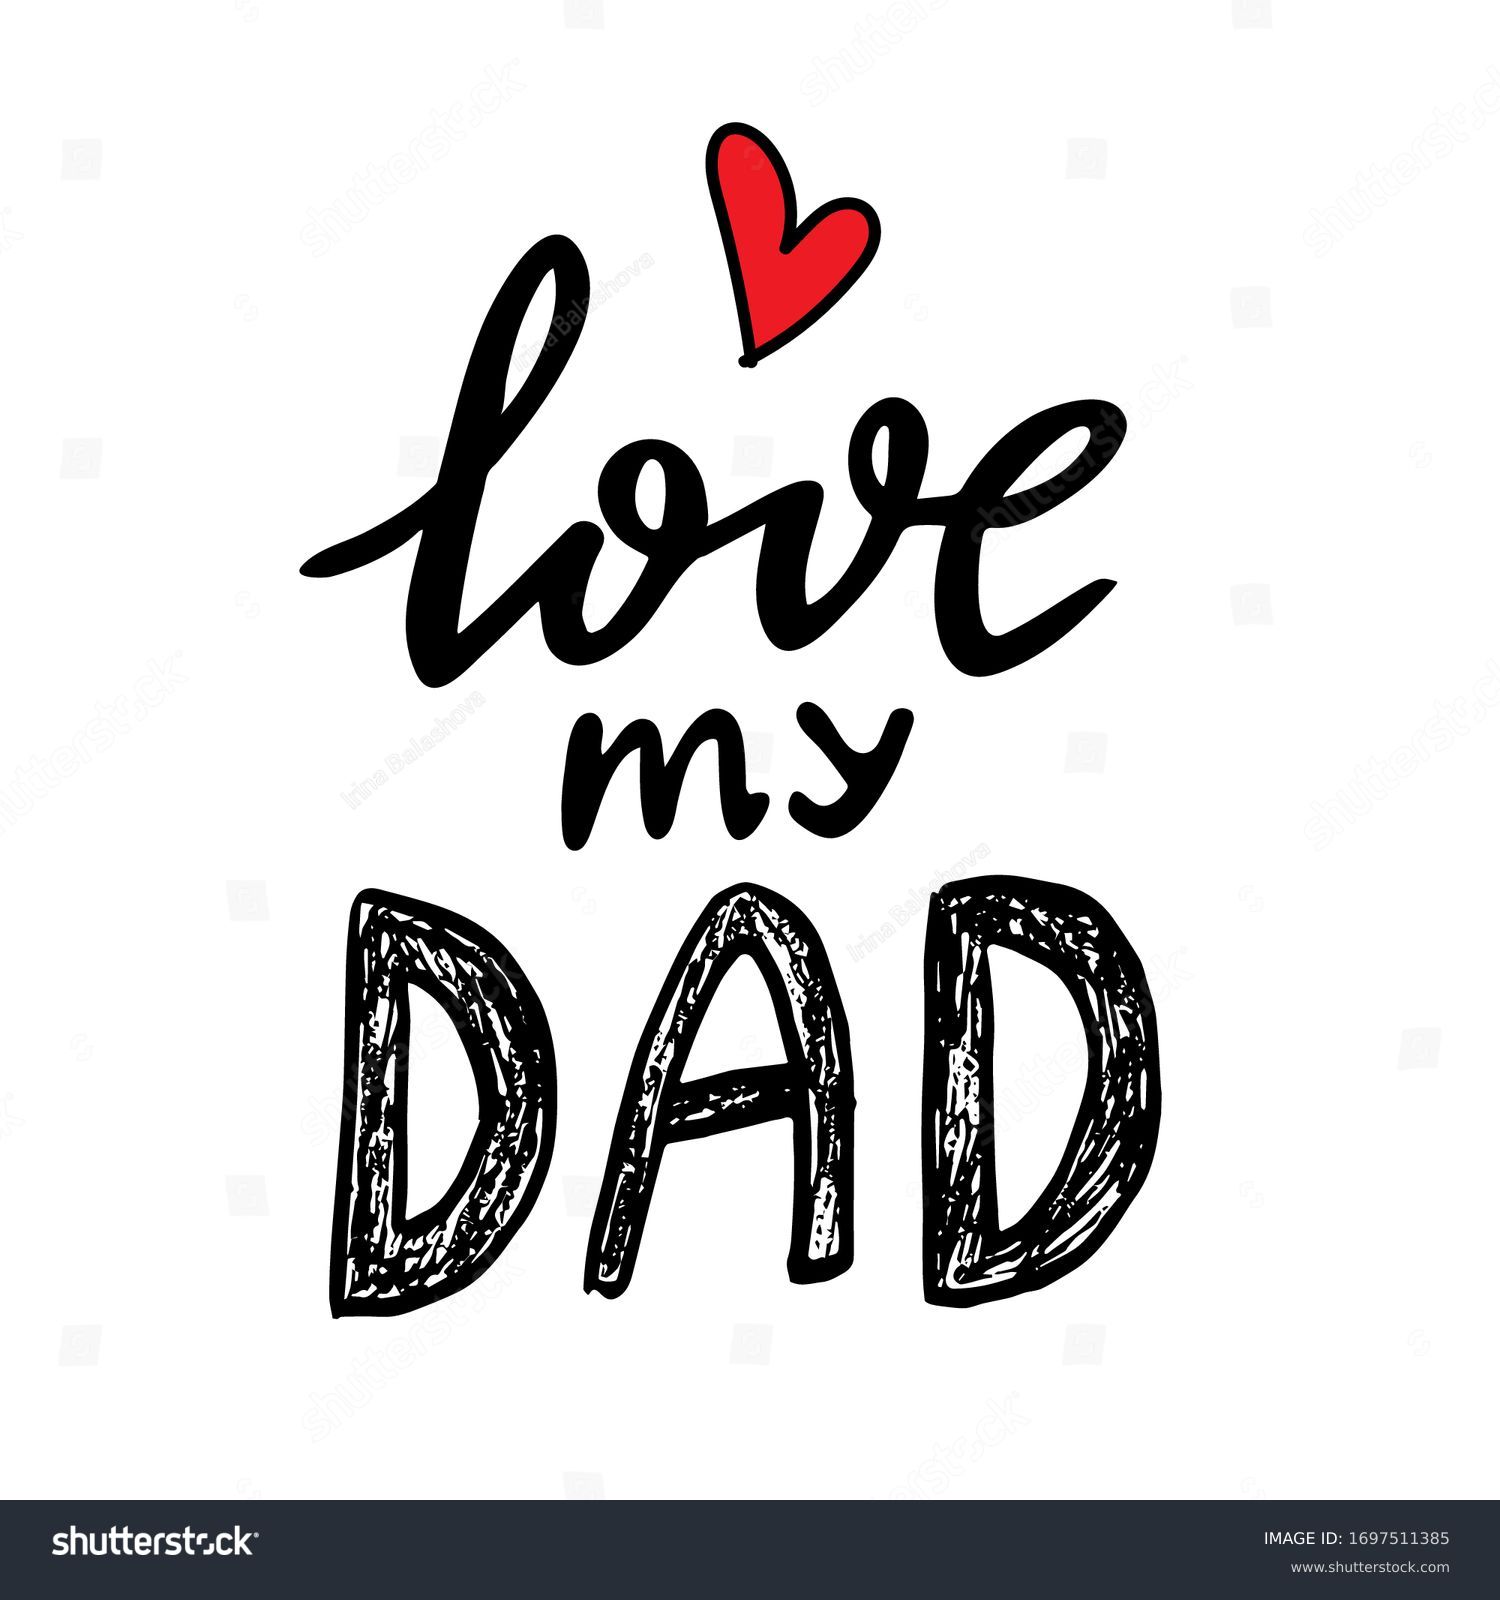 6,910 I love my father Images, Stock Photos & Vectors | Shutterstock